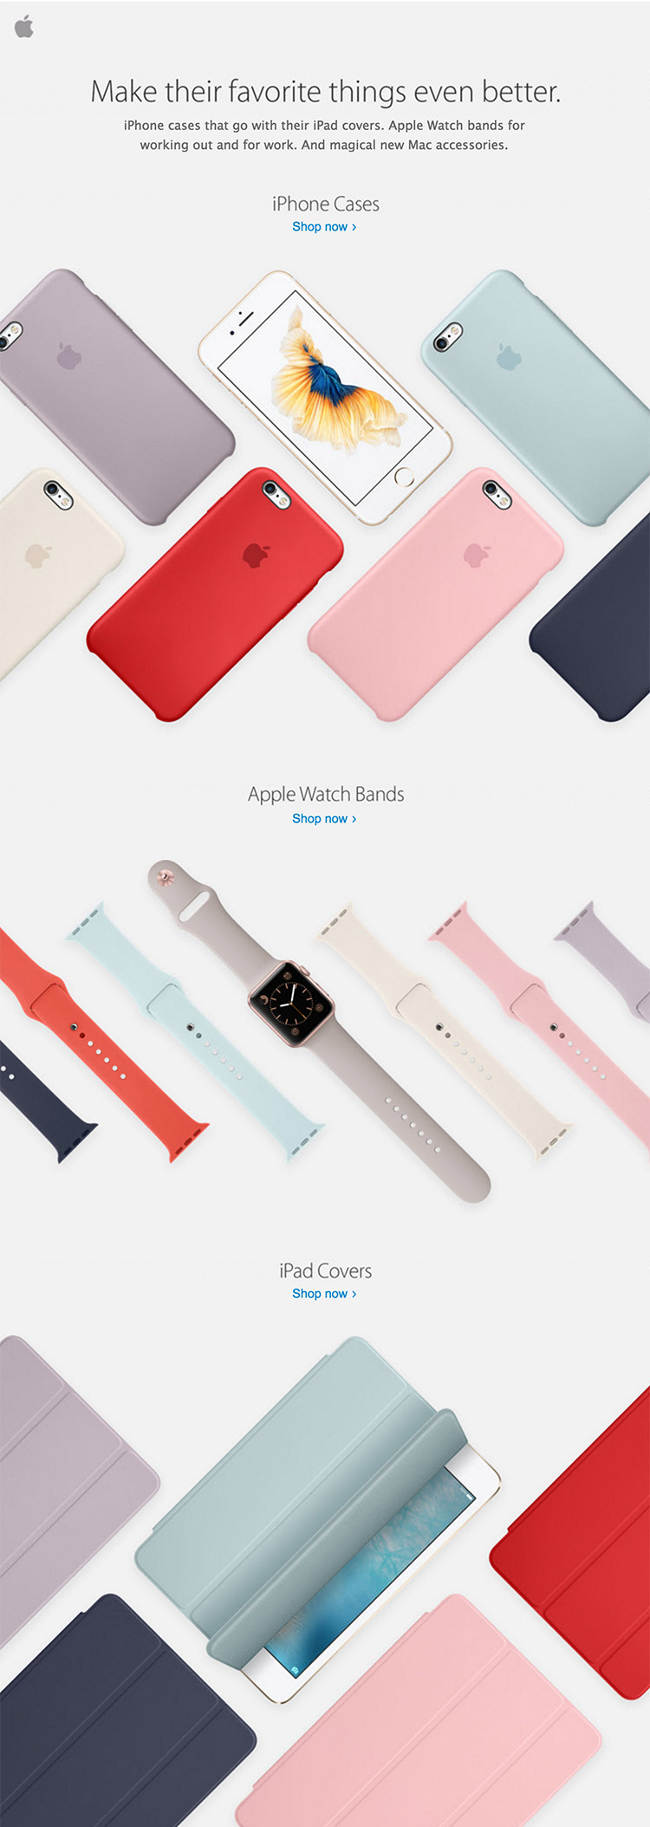 Apple using minimalist imagery and brief copy to showcase their colorful accessories